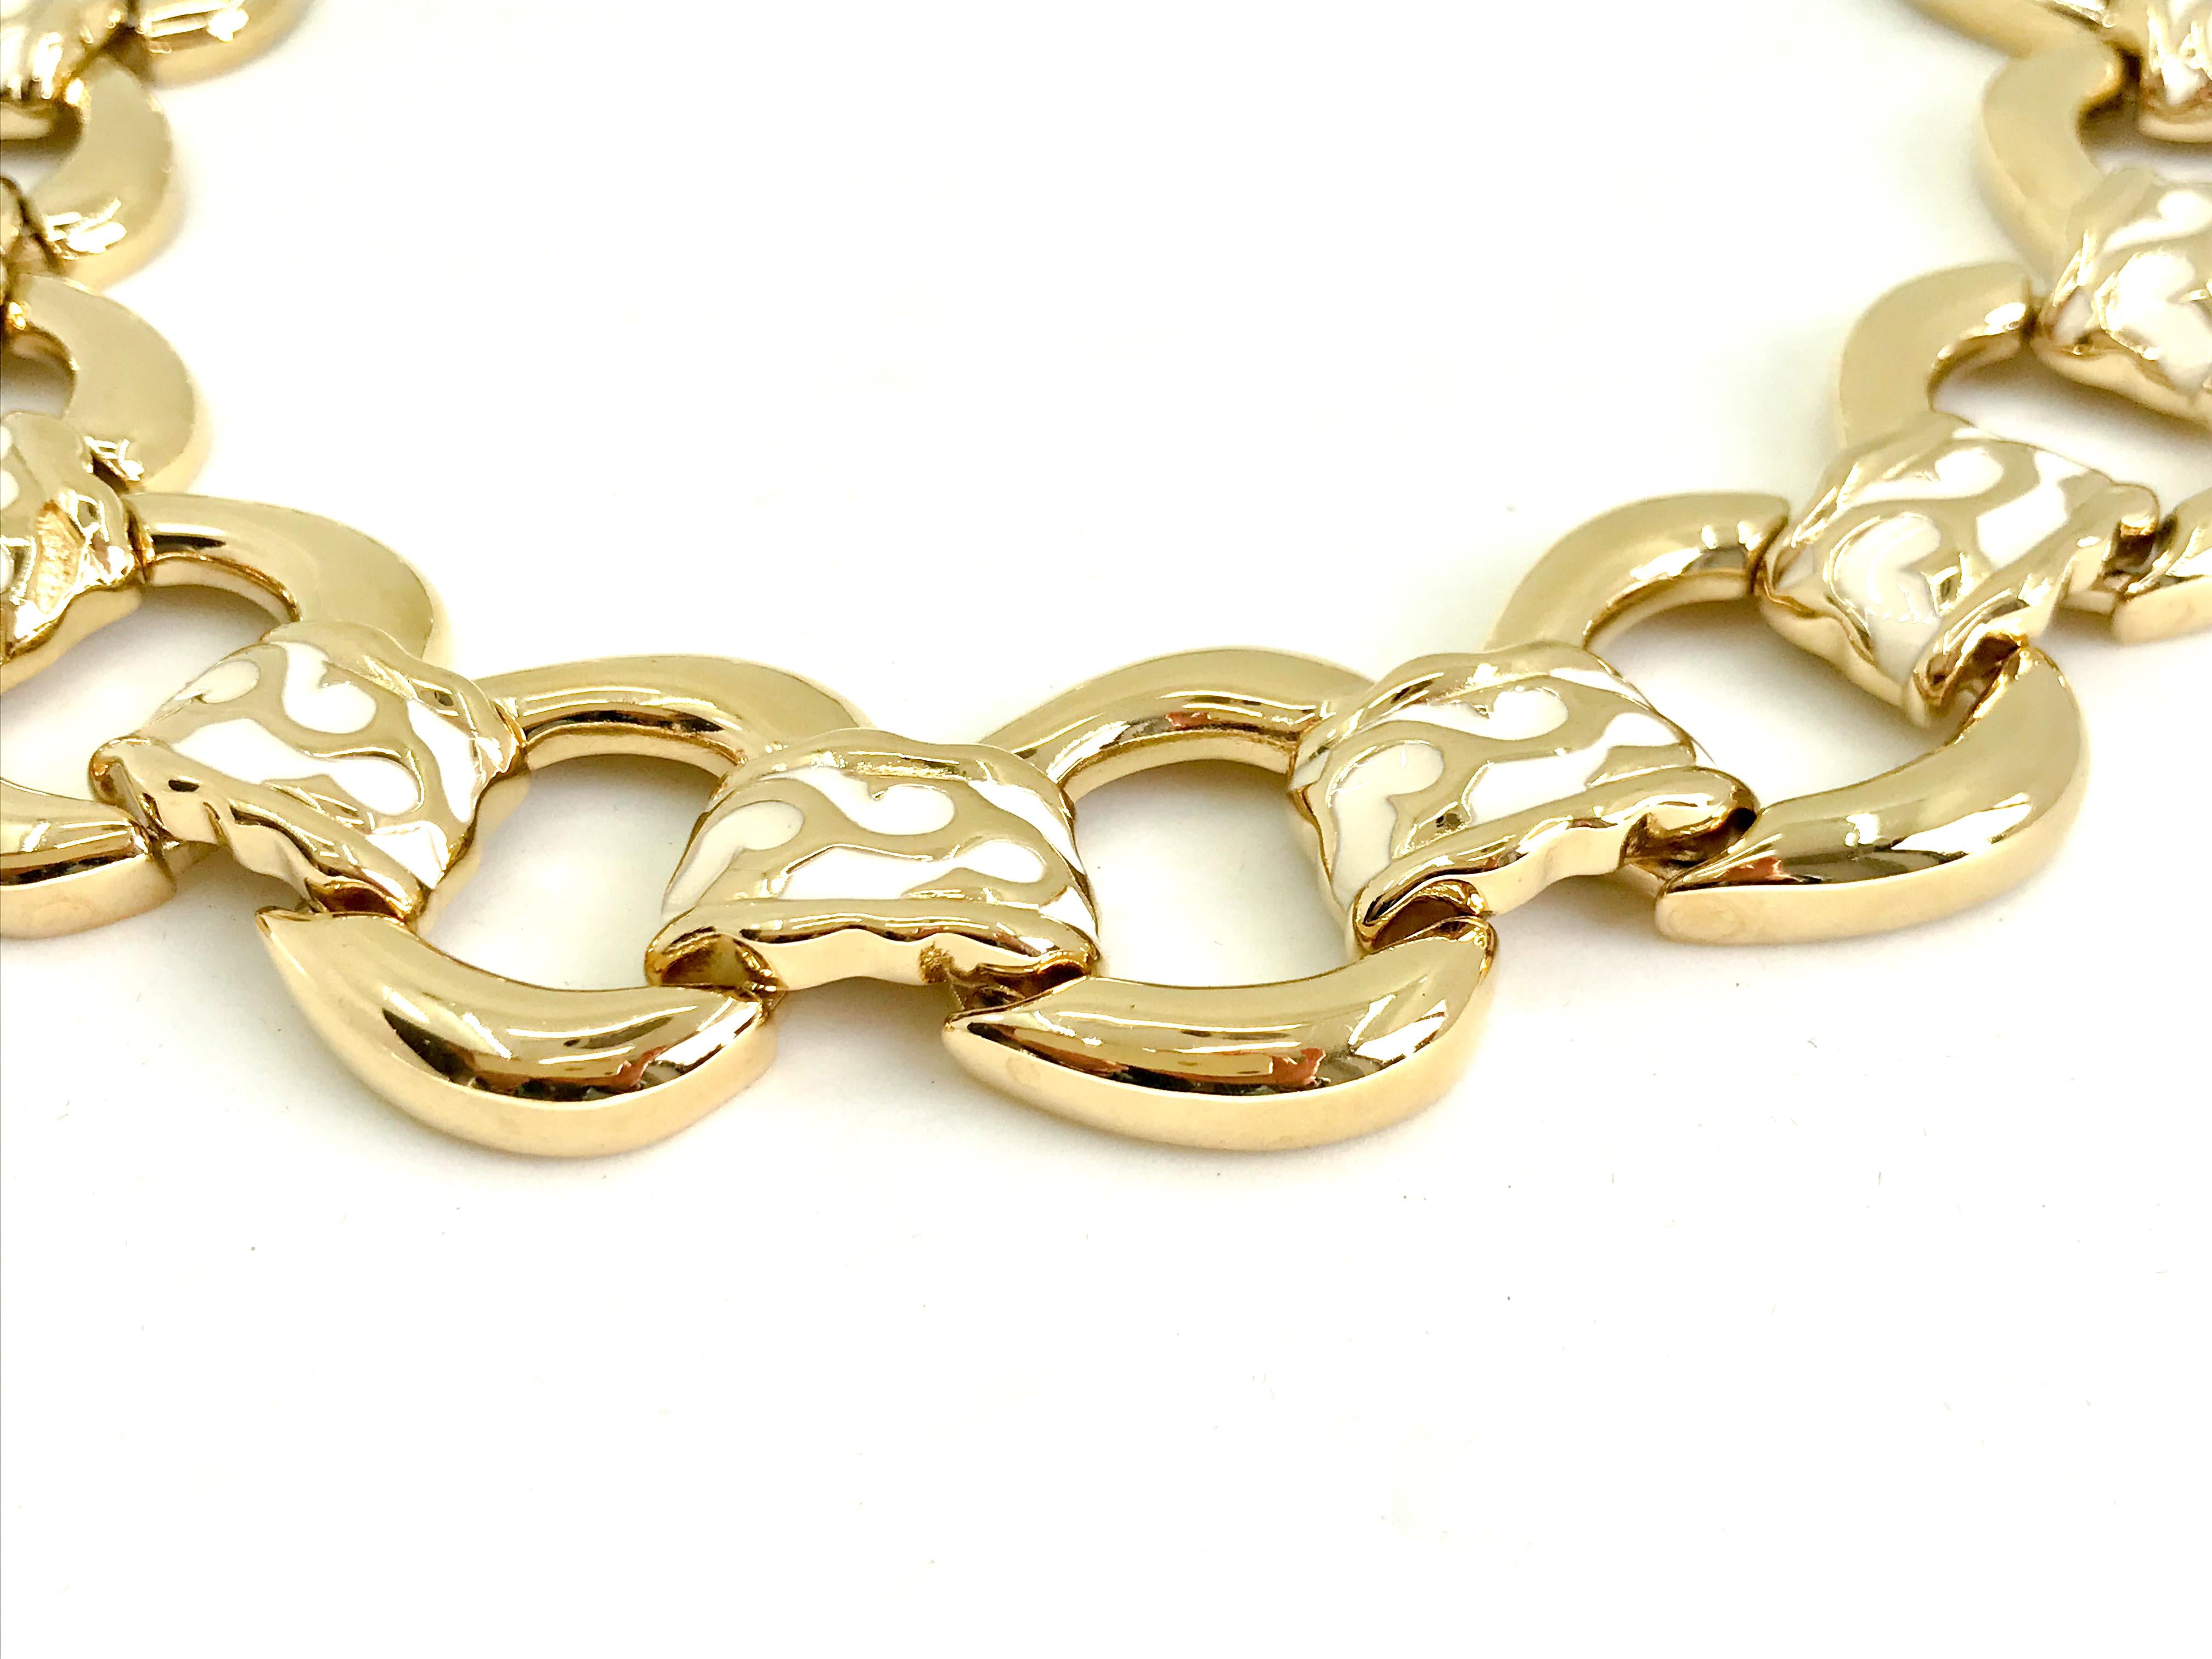 Givenchy 1980s Vintage Statement Necklace For Sale 3